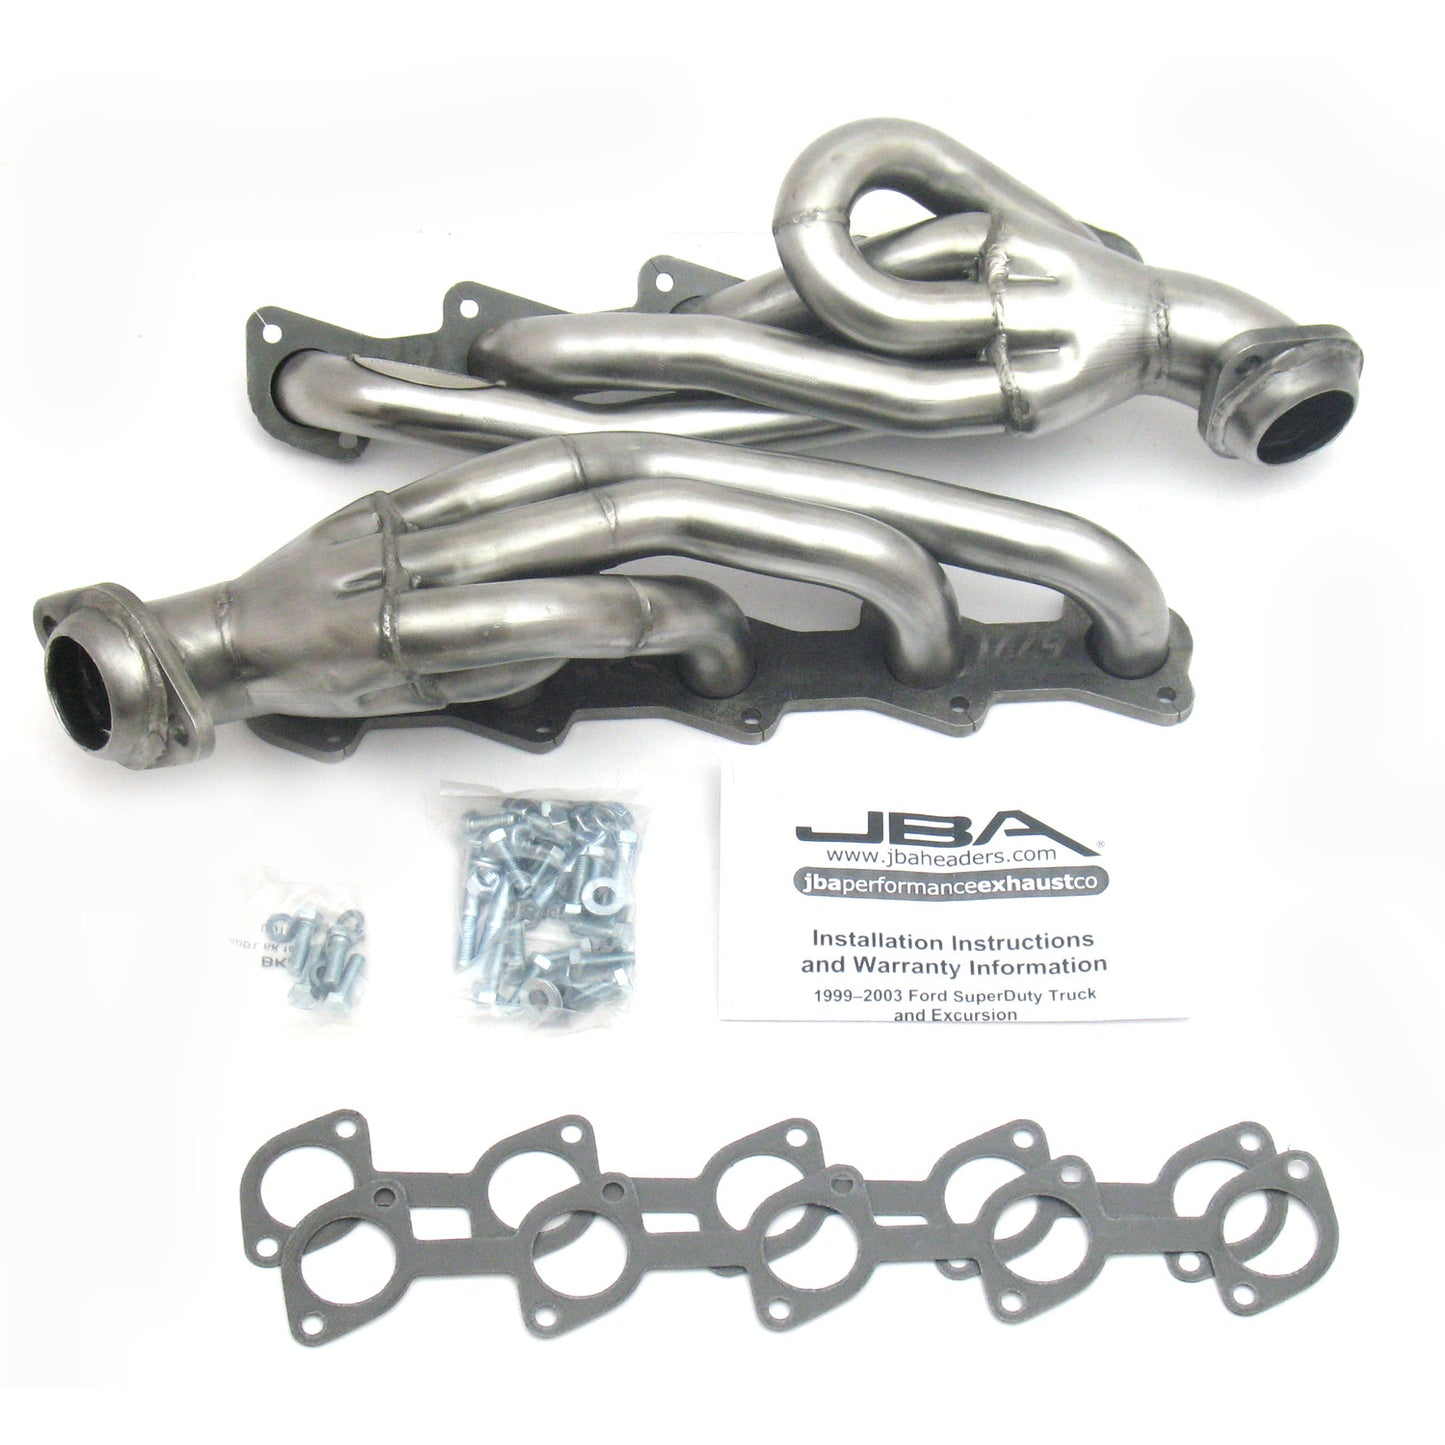 JBA Performance Exhaust 1669S 1 1/2" Header Shorty Stainless Steel 99-04 Ford Truck/Excursion V-10